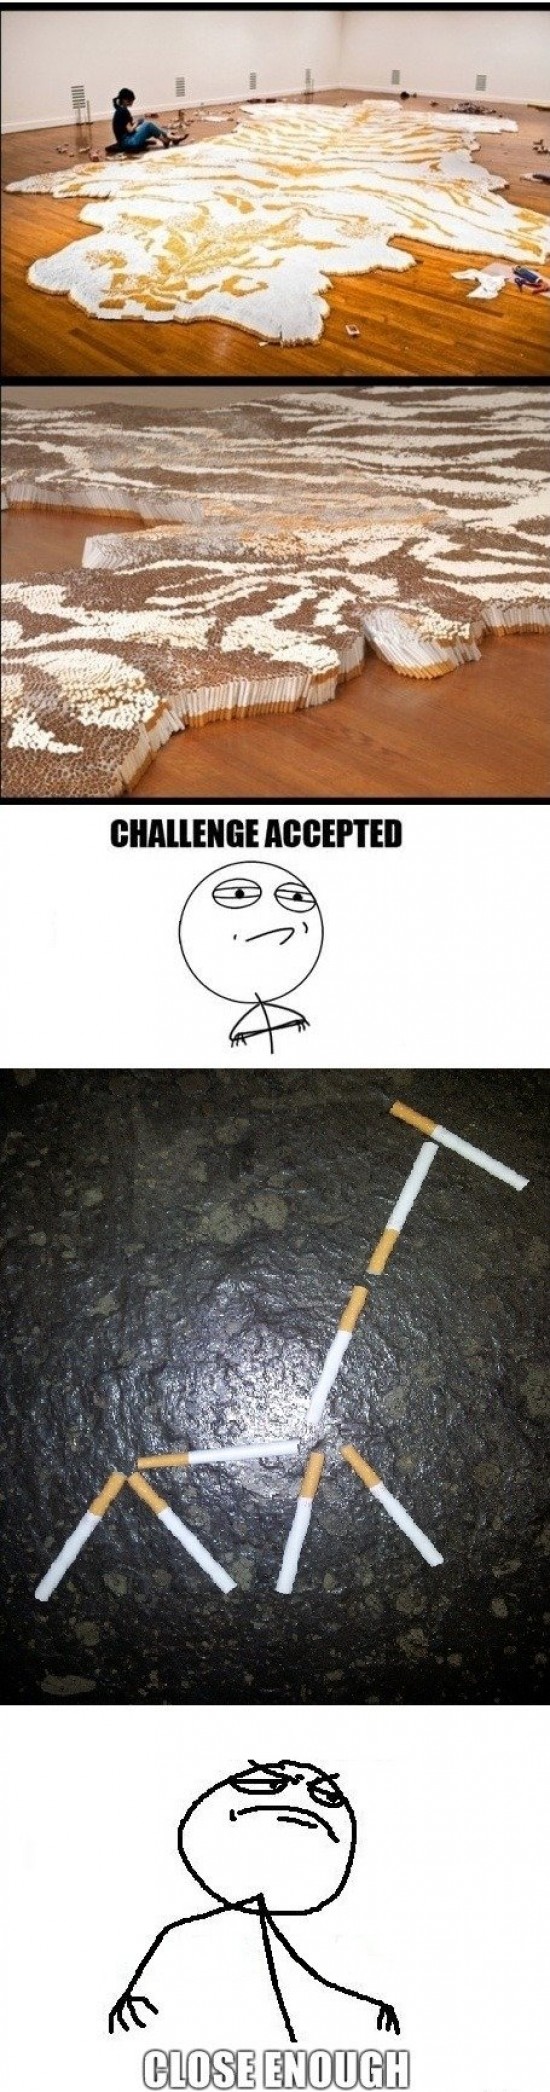 Challenge_accepted - 50000 cigarrillos